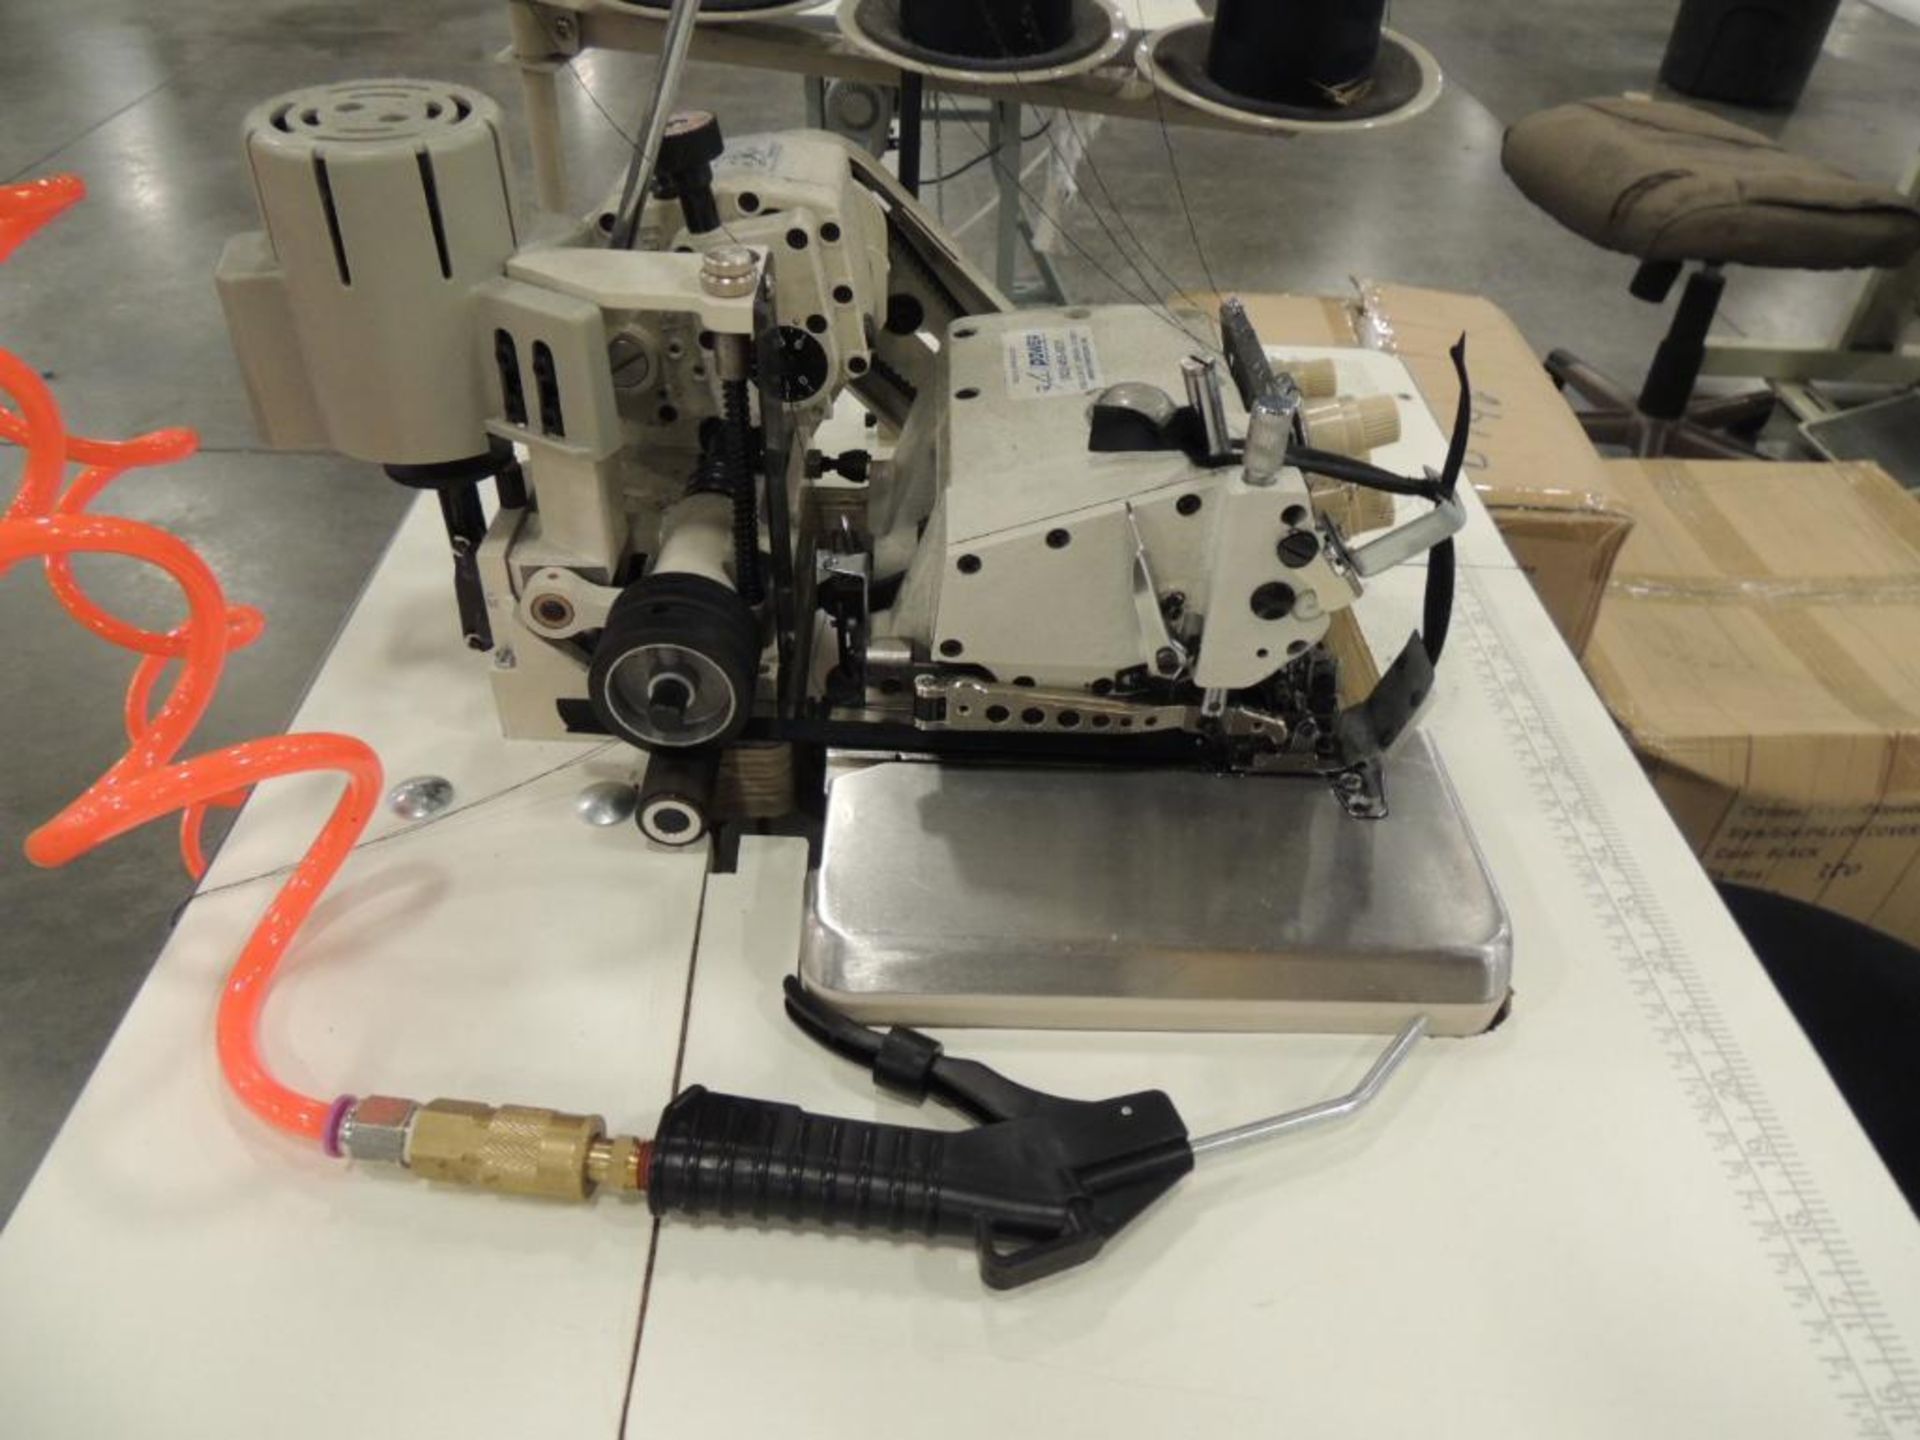 King Max MO-3343-F Overlock 2-Needle, 5-Thread Sewing Machine, on Table - Image 3 of 3